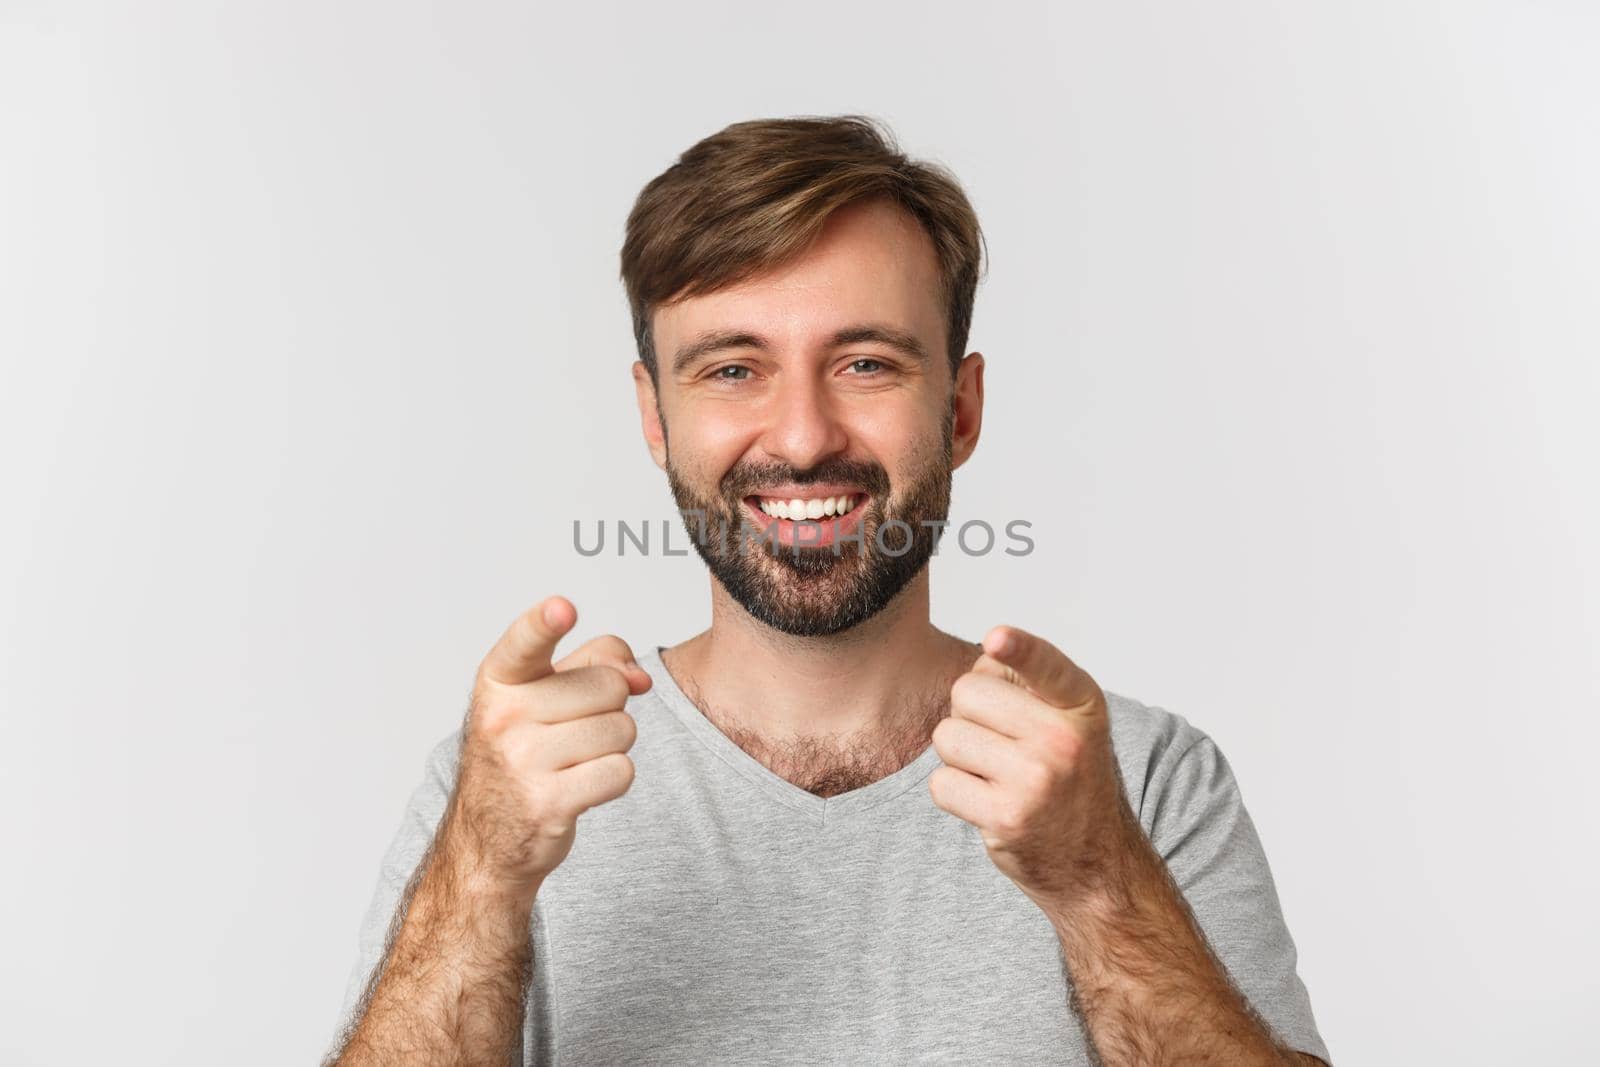 Close-up of handsome adult man with beard, smiling and pointing fingers at camera, standing in gray t-shirt over white background.